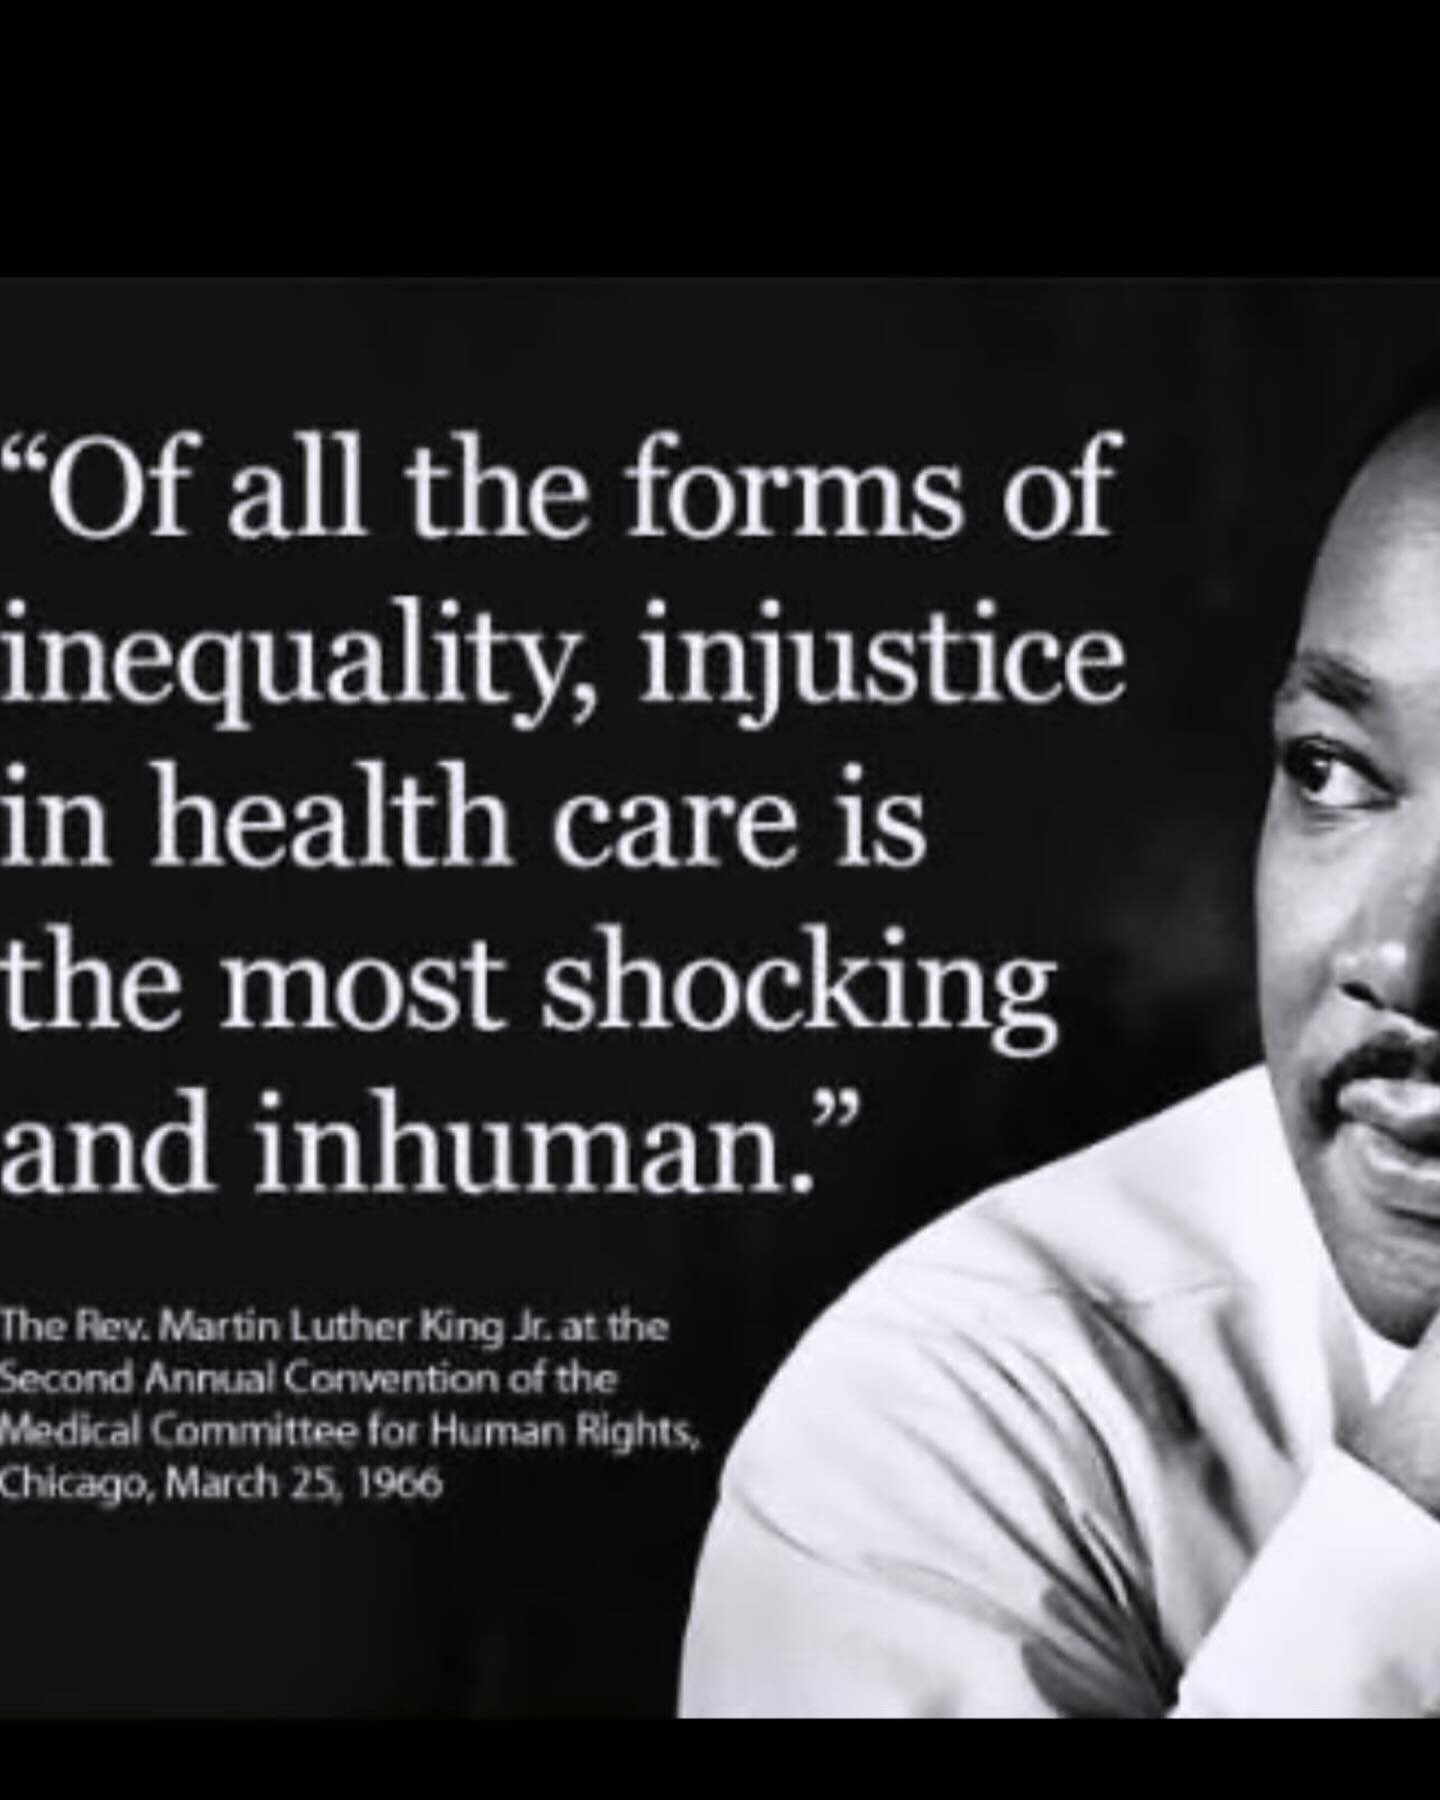 One of the lesser known quotes from #mlk but rang true then and still rings true 50 years later today. A big portion of work we do in #healthtech and #healthcare sector relates to this. Making a small dent everyday.